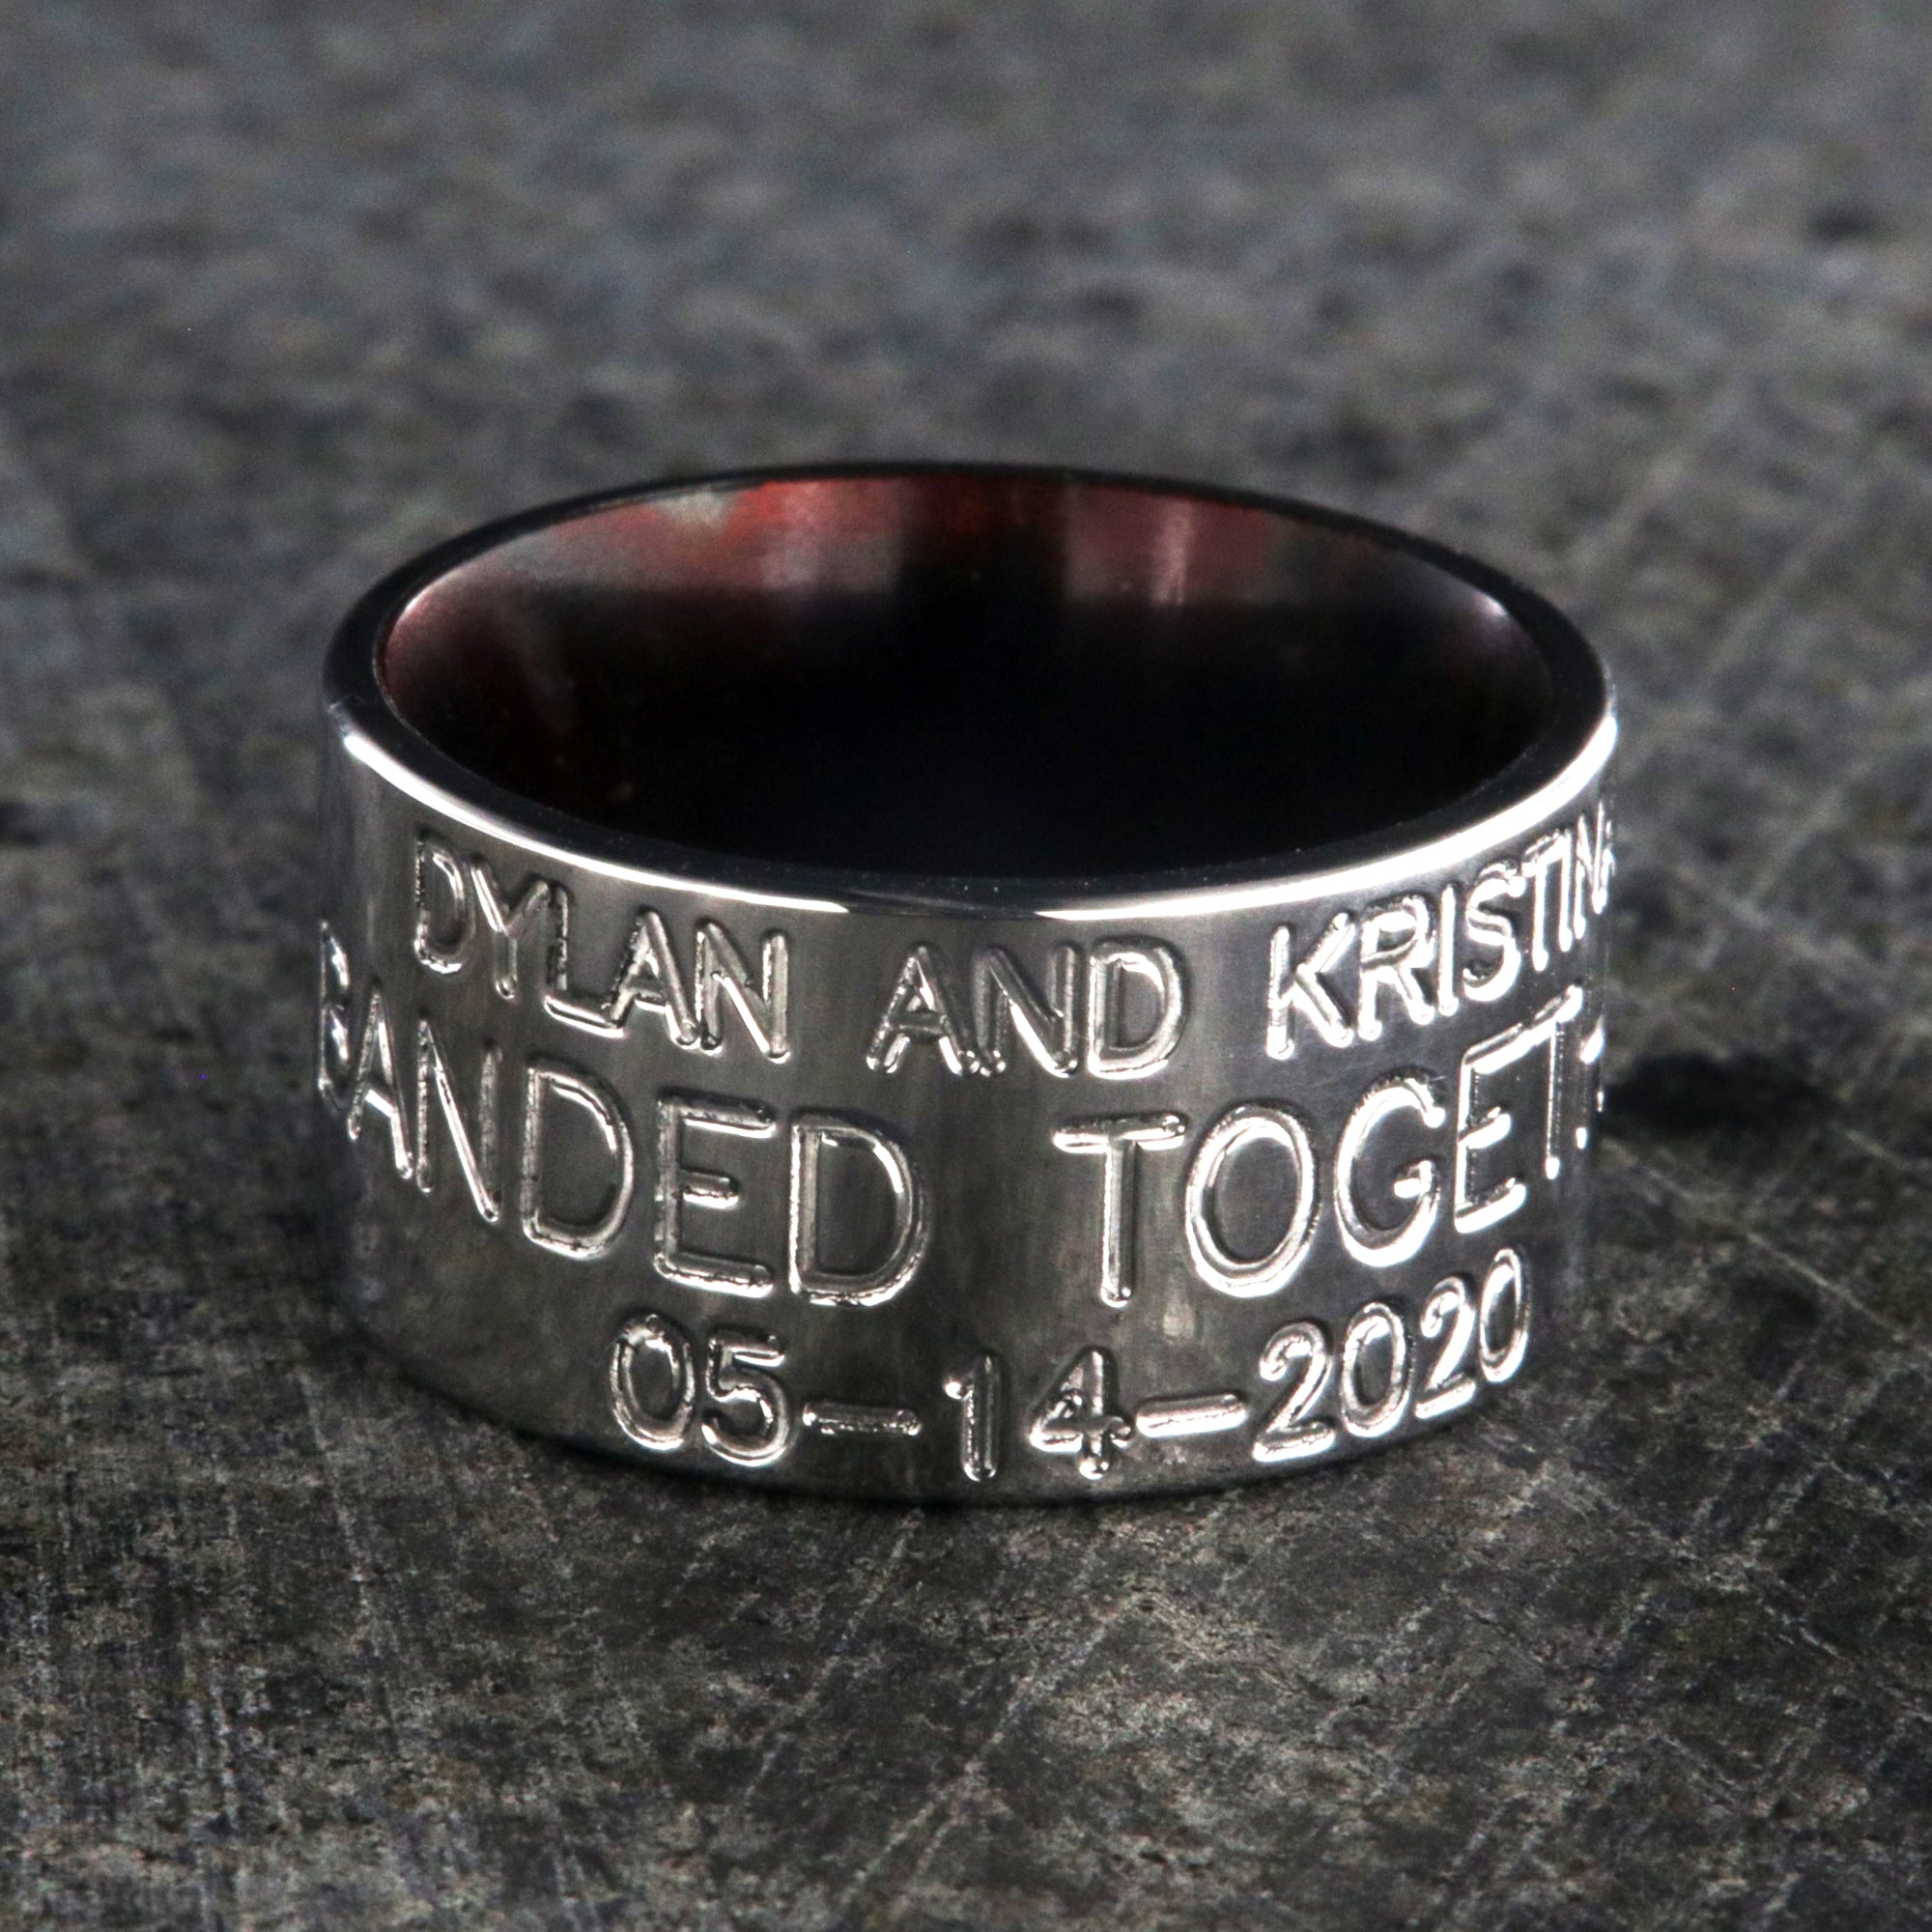 12mm wide titanium duck band ring with 3 lines of text with a dark red sleeve